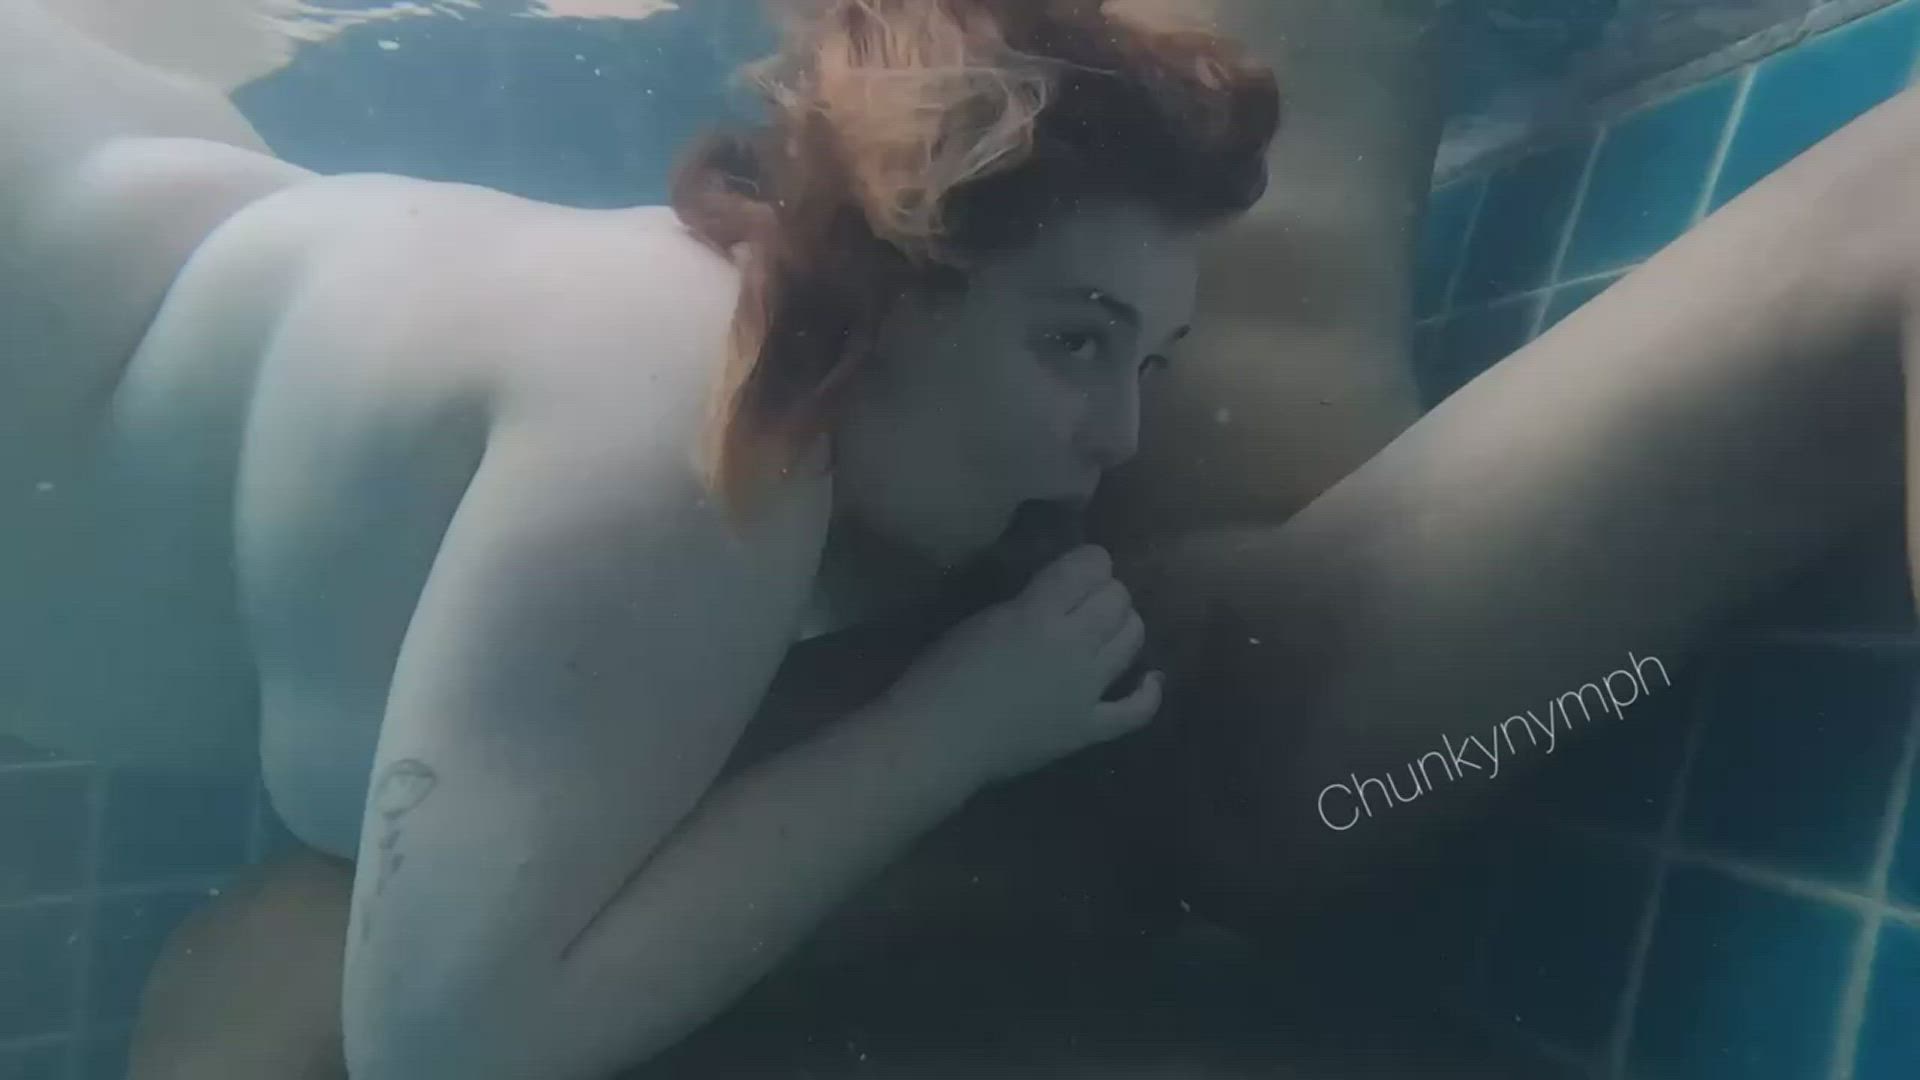 Amateur porn video with onlyfans model Chunkynymph ??‍♀️ <strong>@chunkynymph</strong>